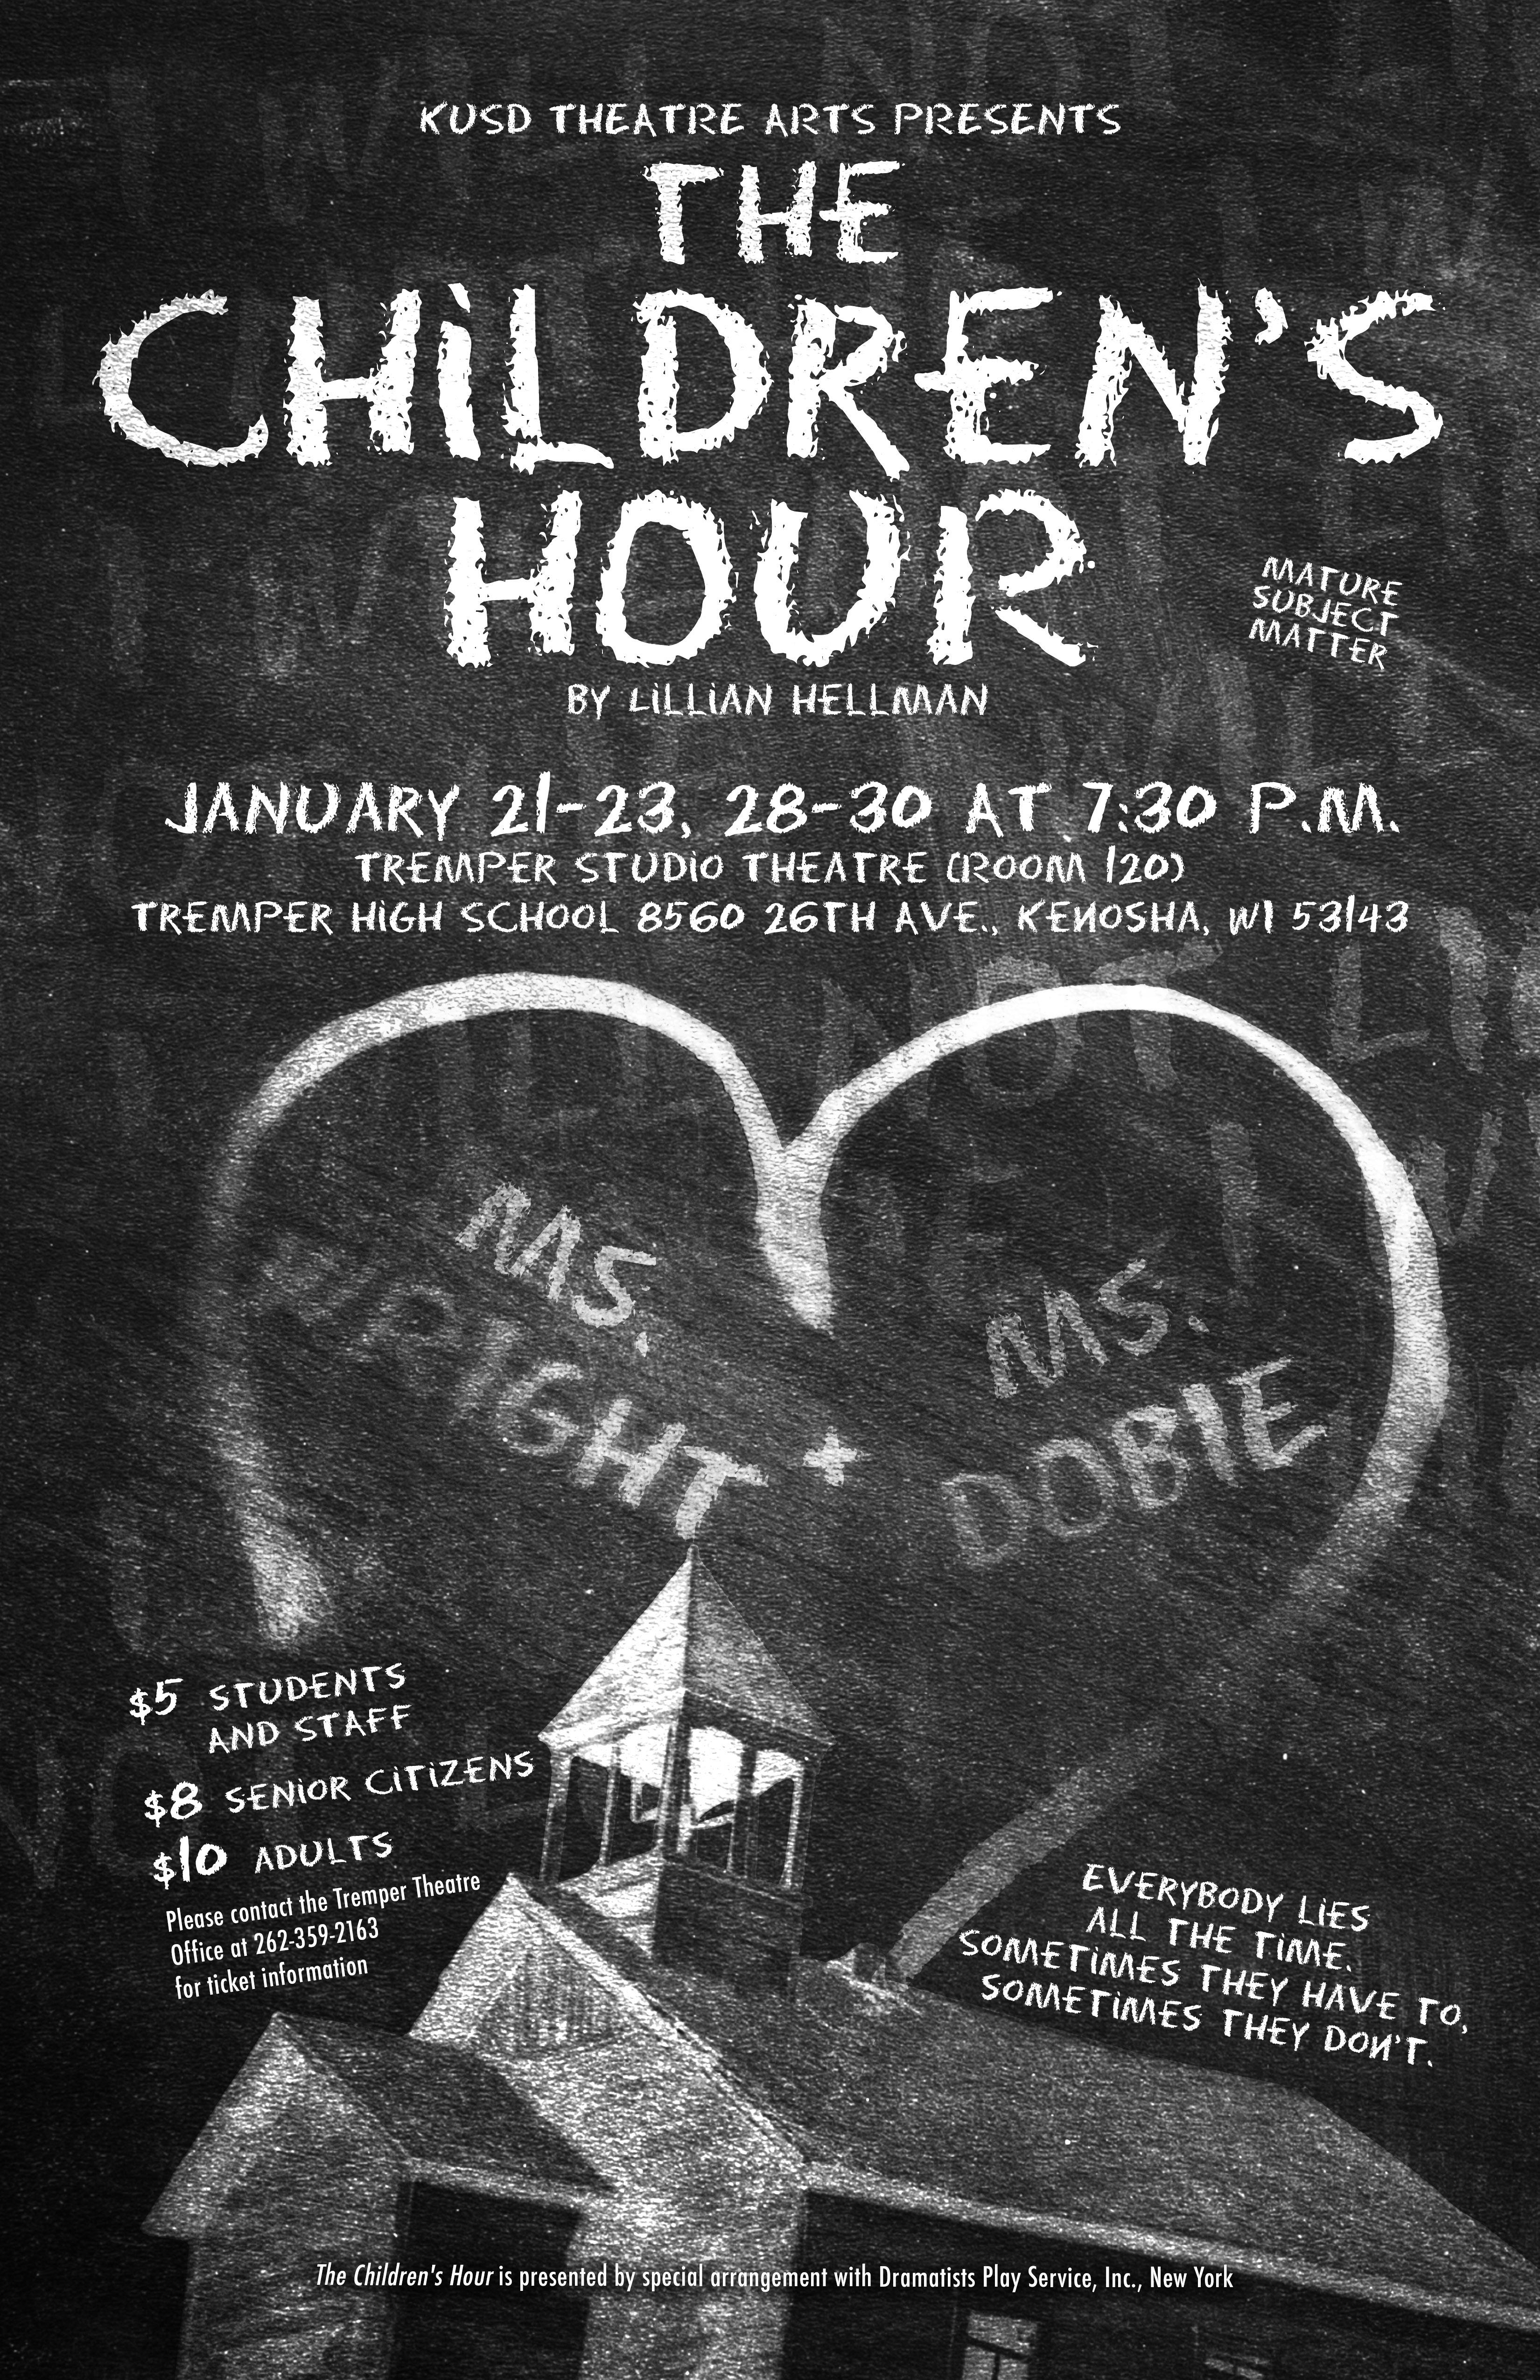 The poster for The Children's Hour